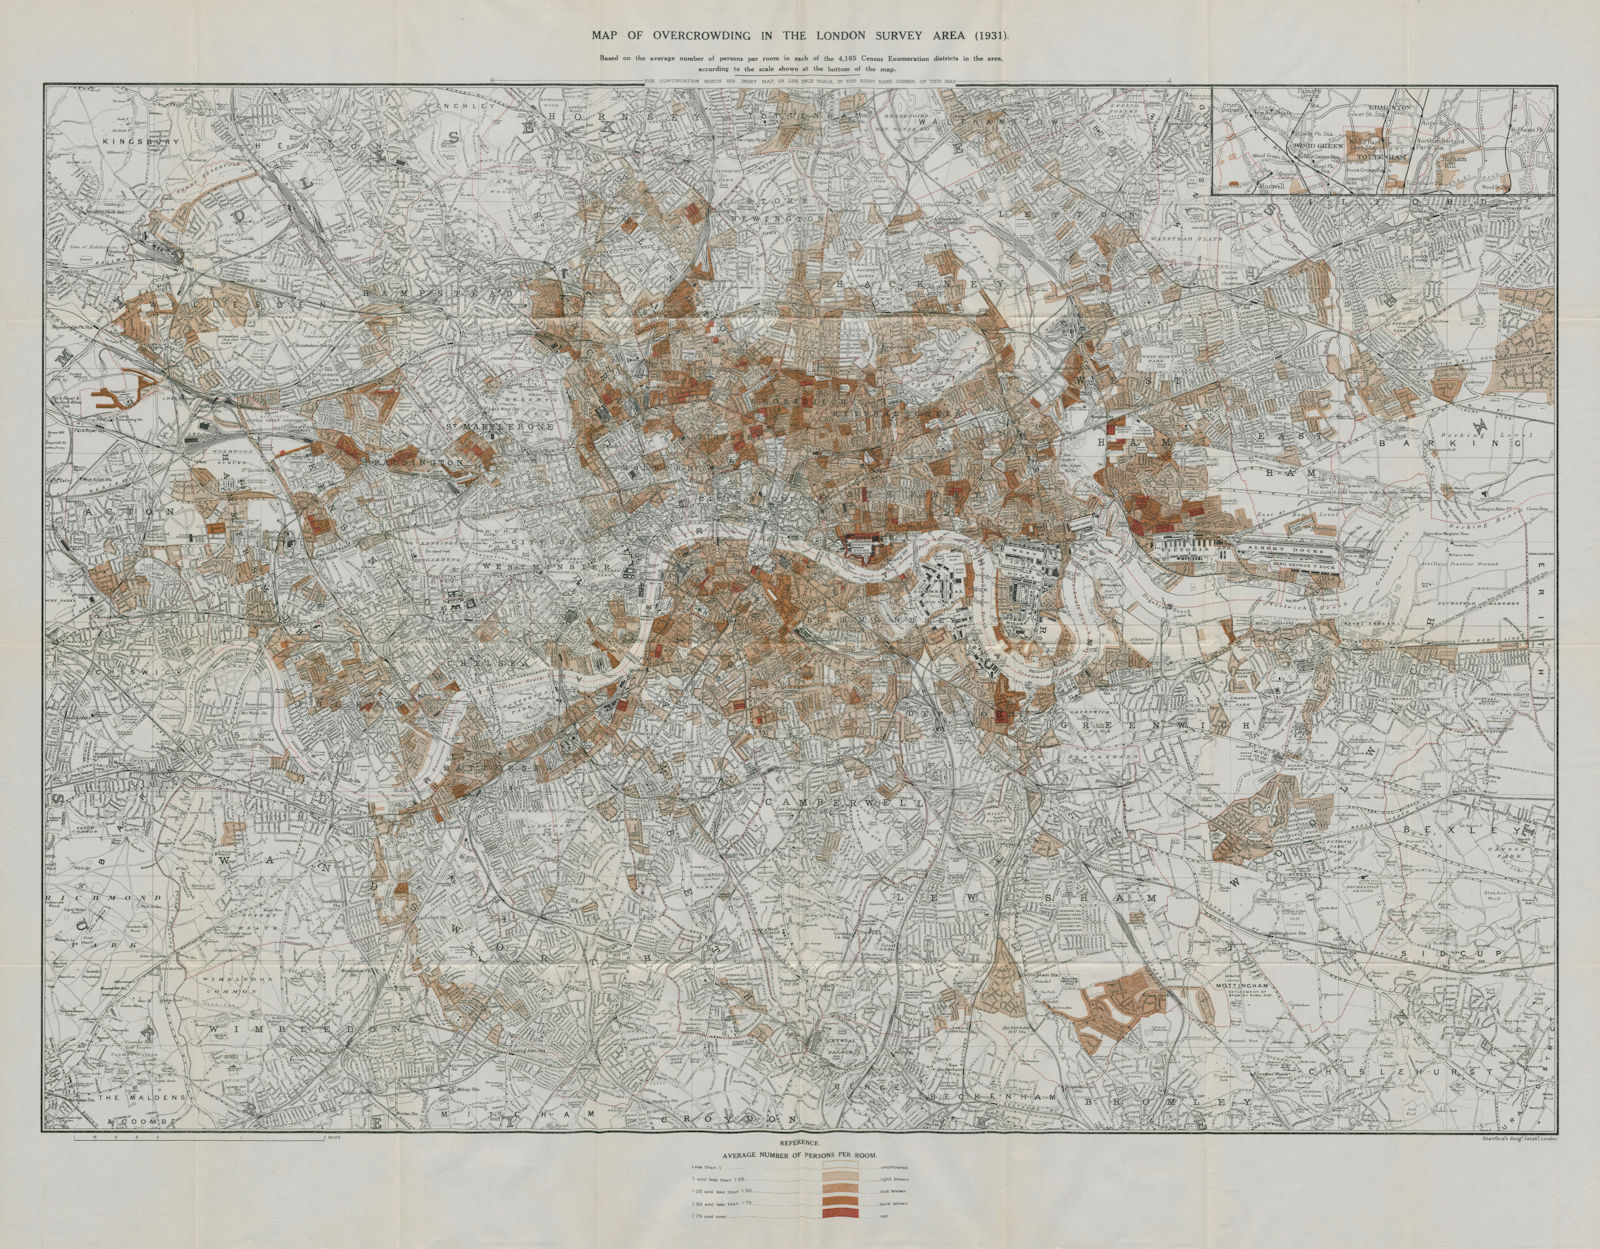 London Overcrowding. People per room. Charles Booth / LSE POVERTY MAP 1931